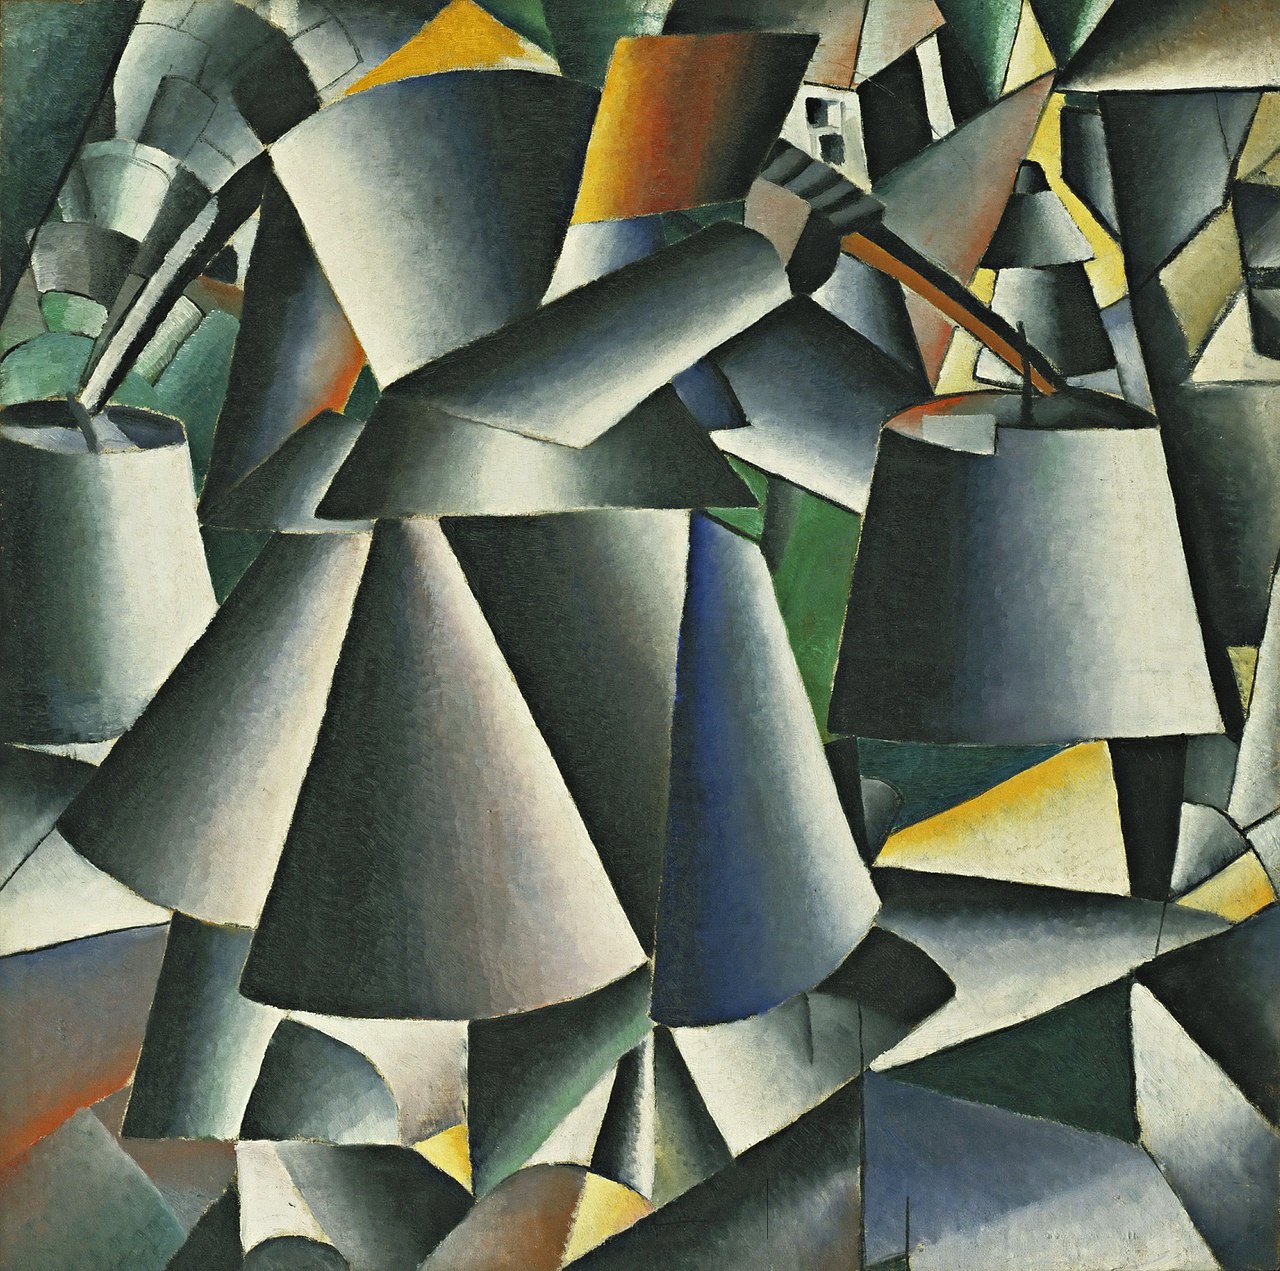 1280px-Woman_with_Pails_(Malevich,_1912).jpg